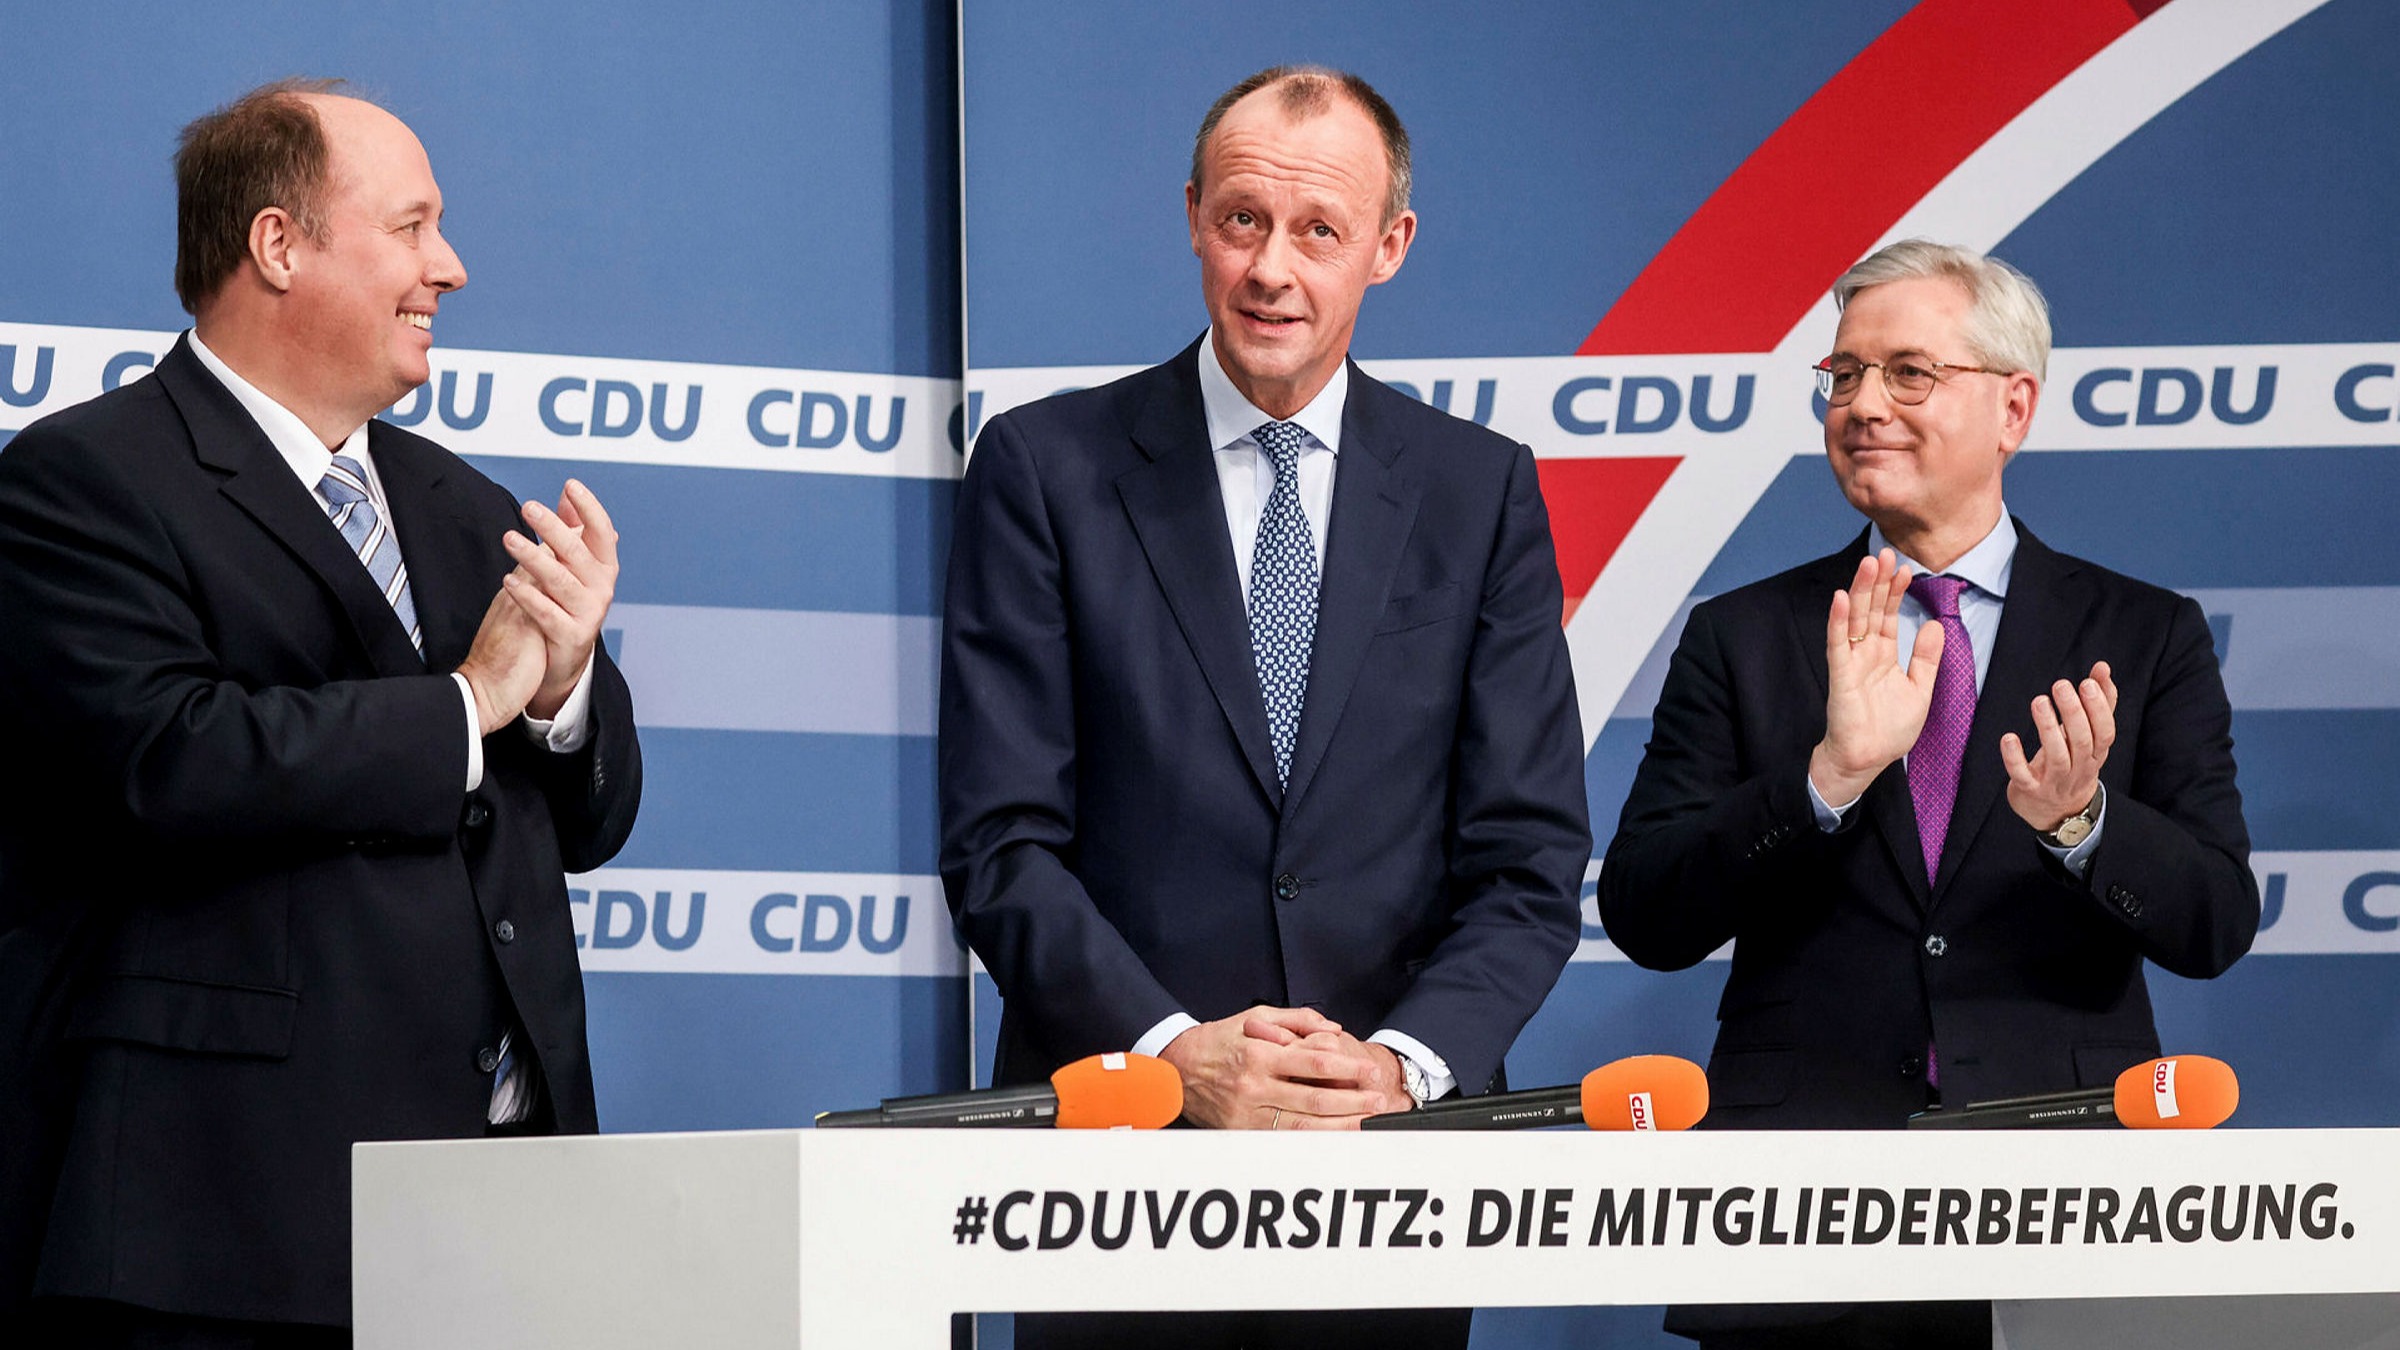 Conservative Friedrich Merz wins poll to lead Germany's Christian Democrats  | Financial Times